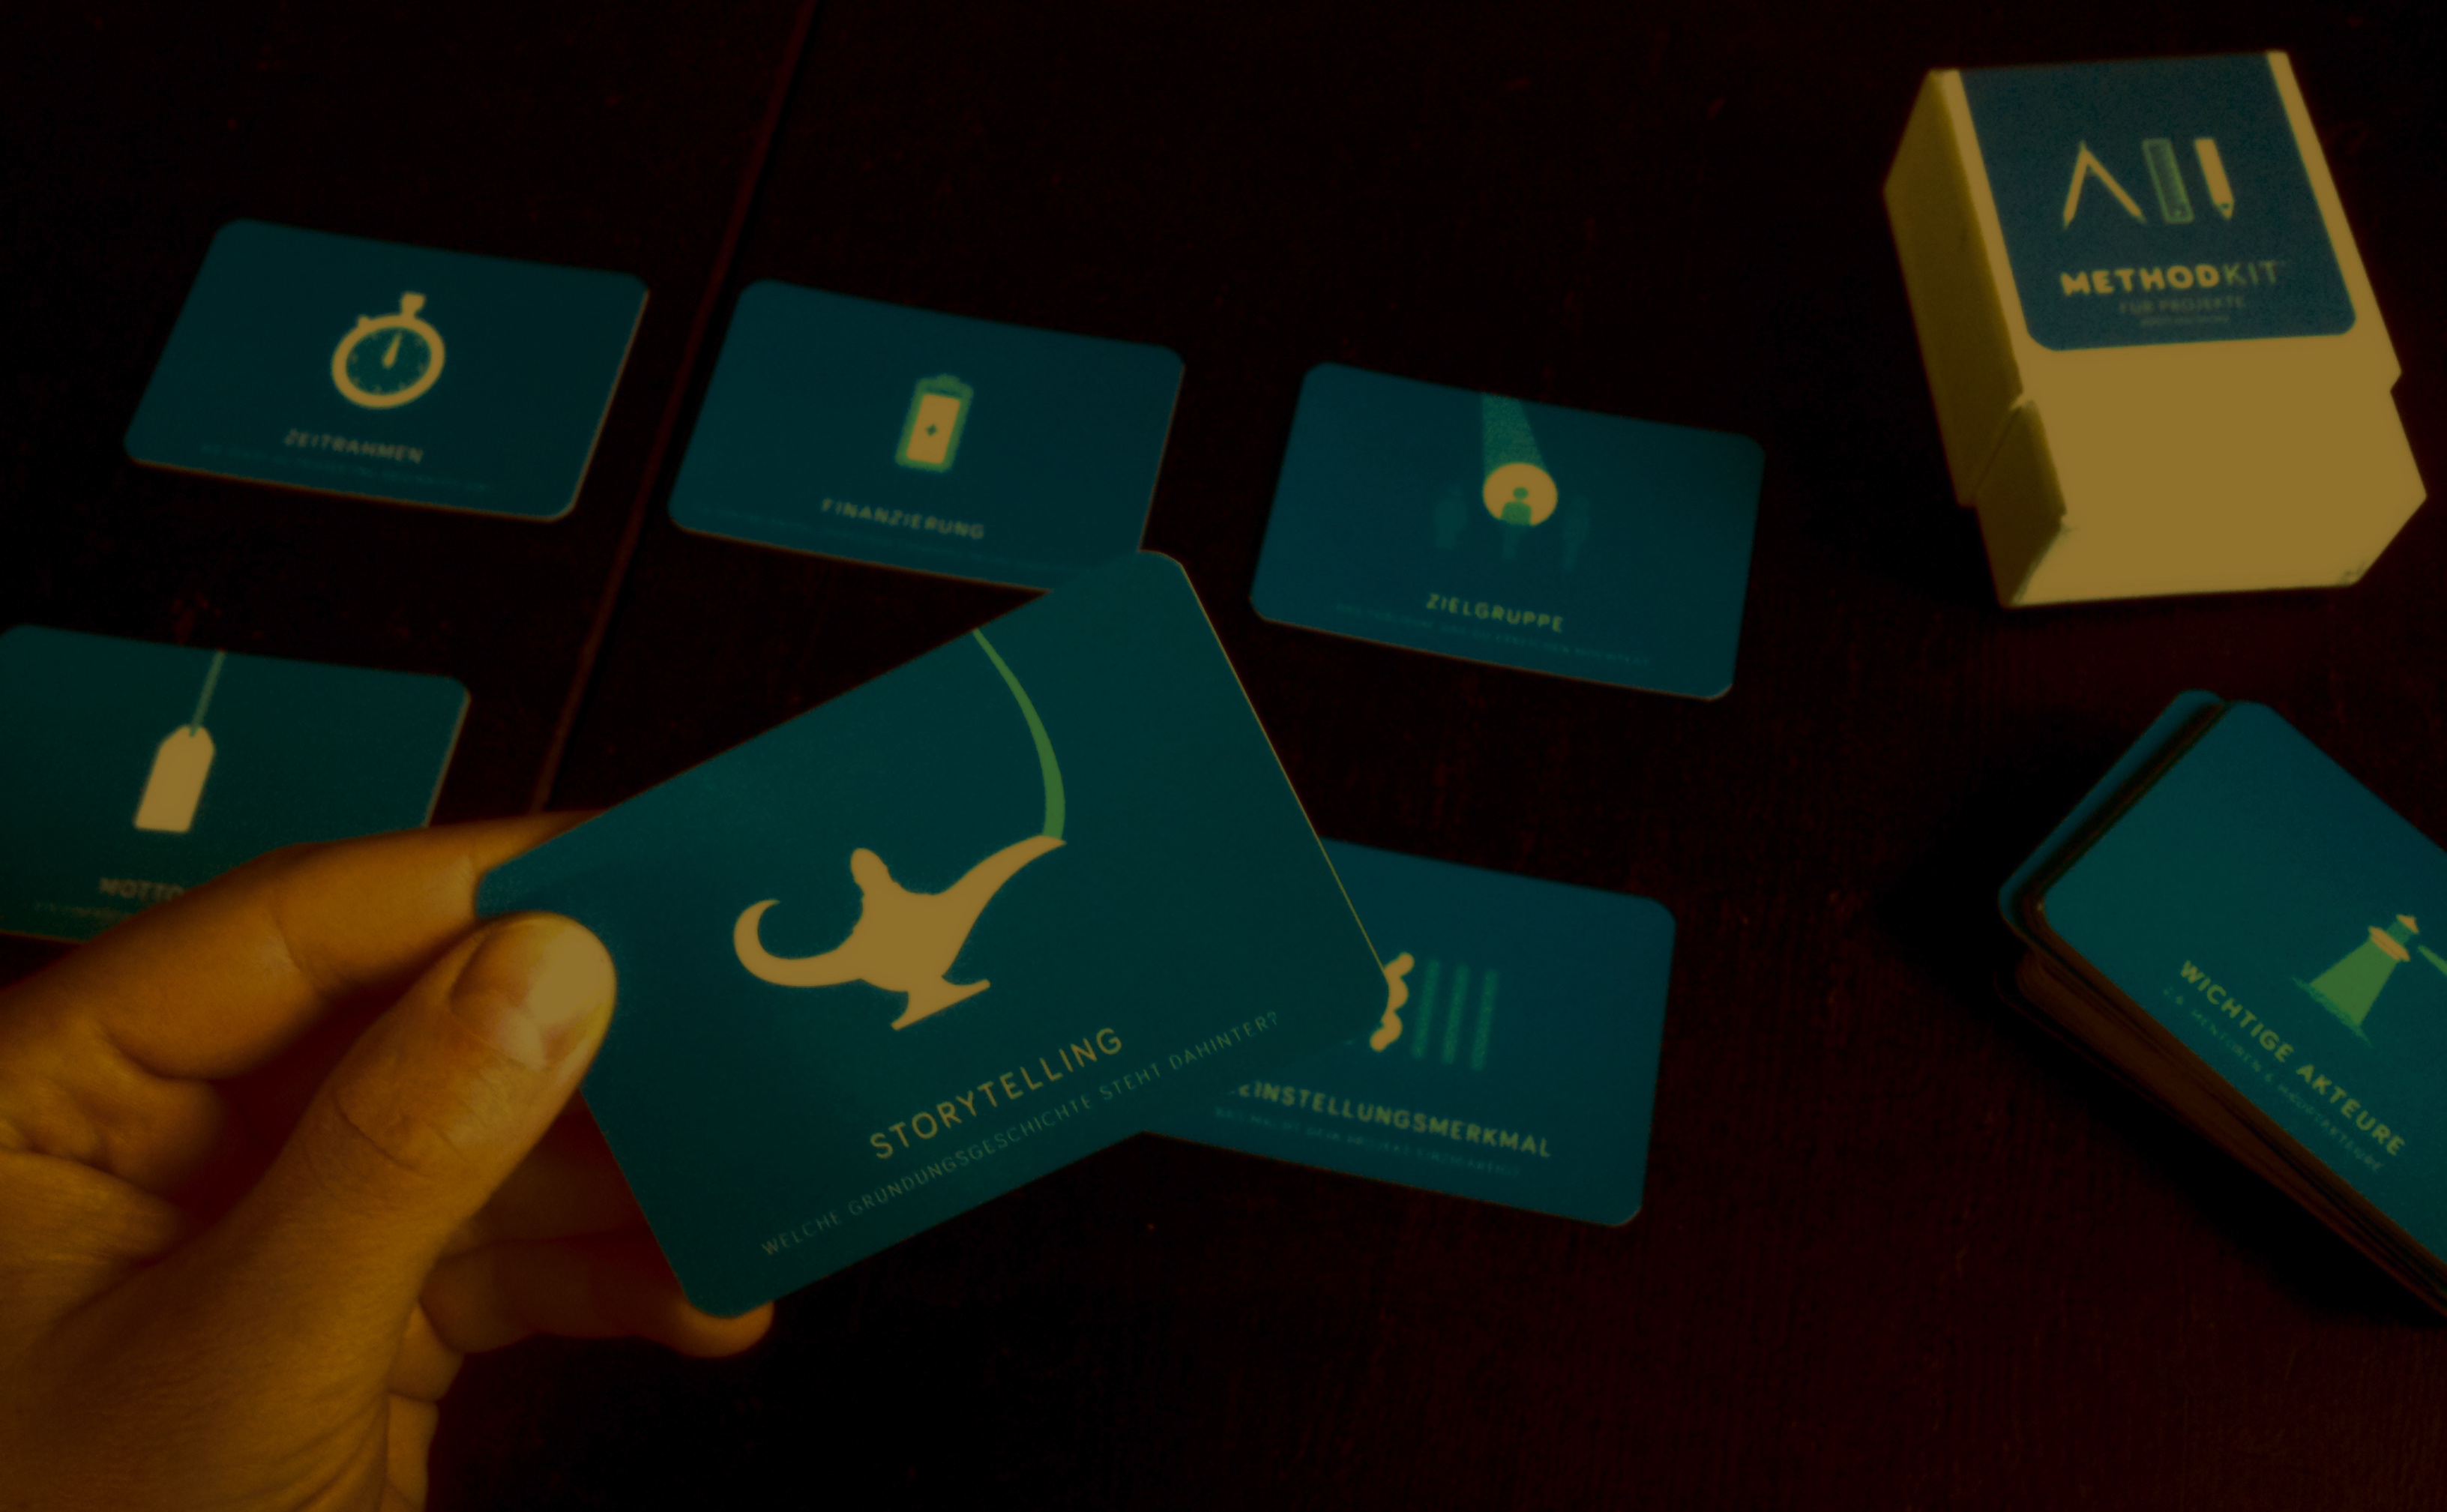 methodkit showing the project management cards